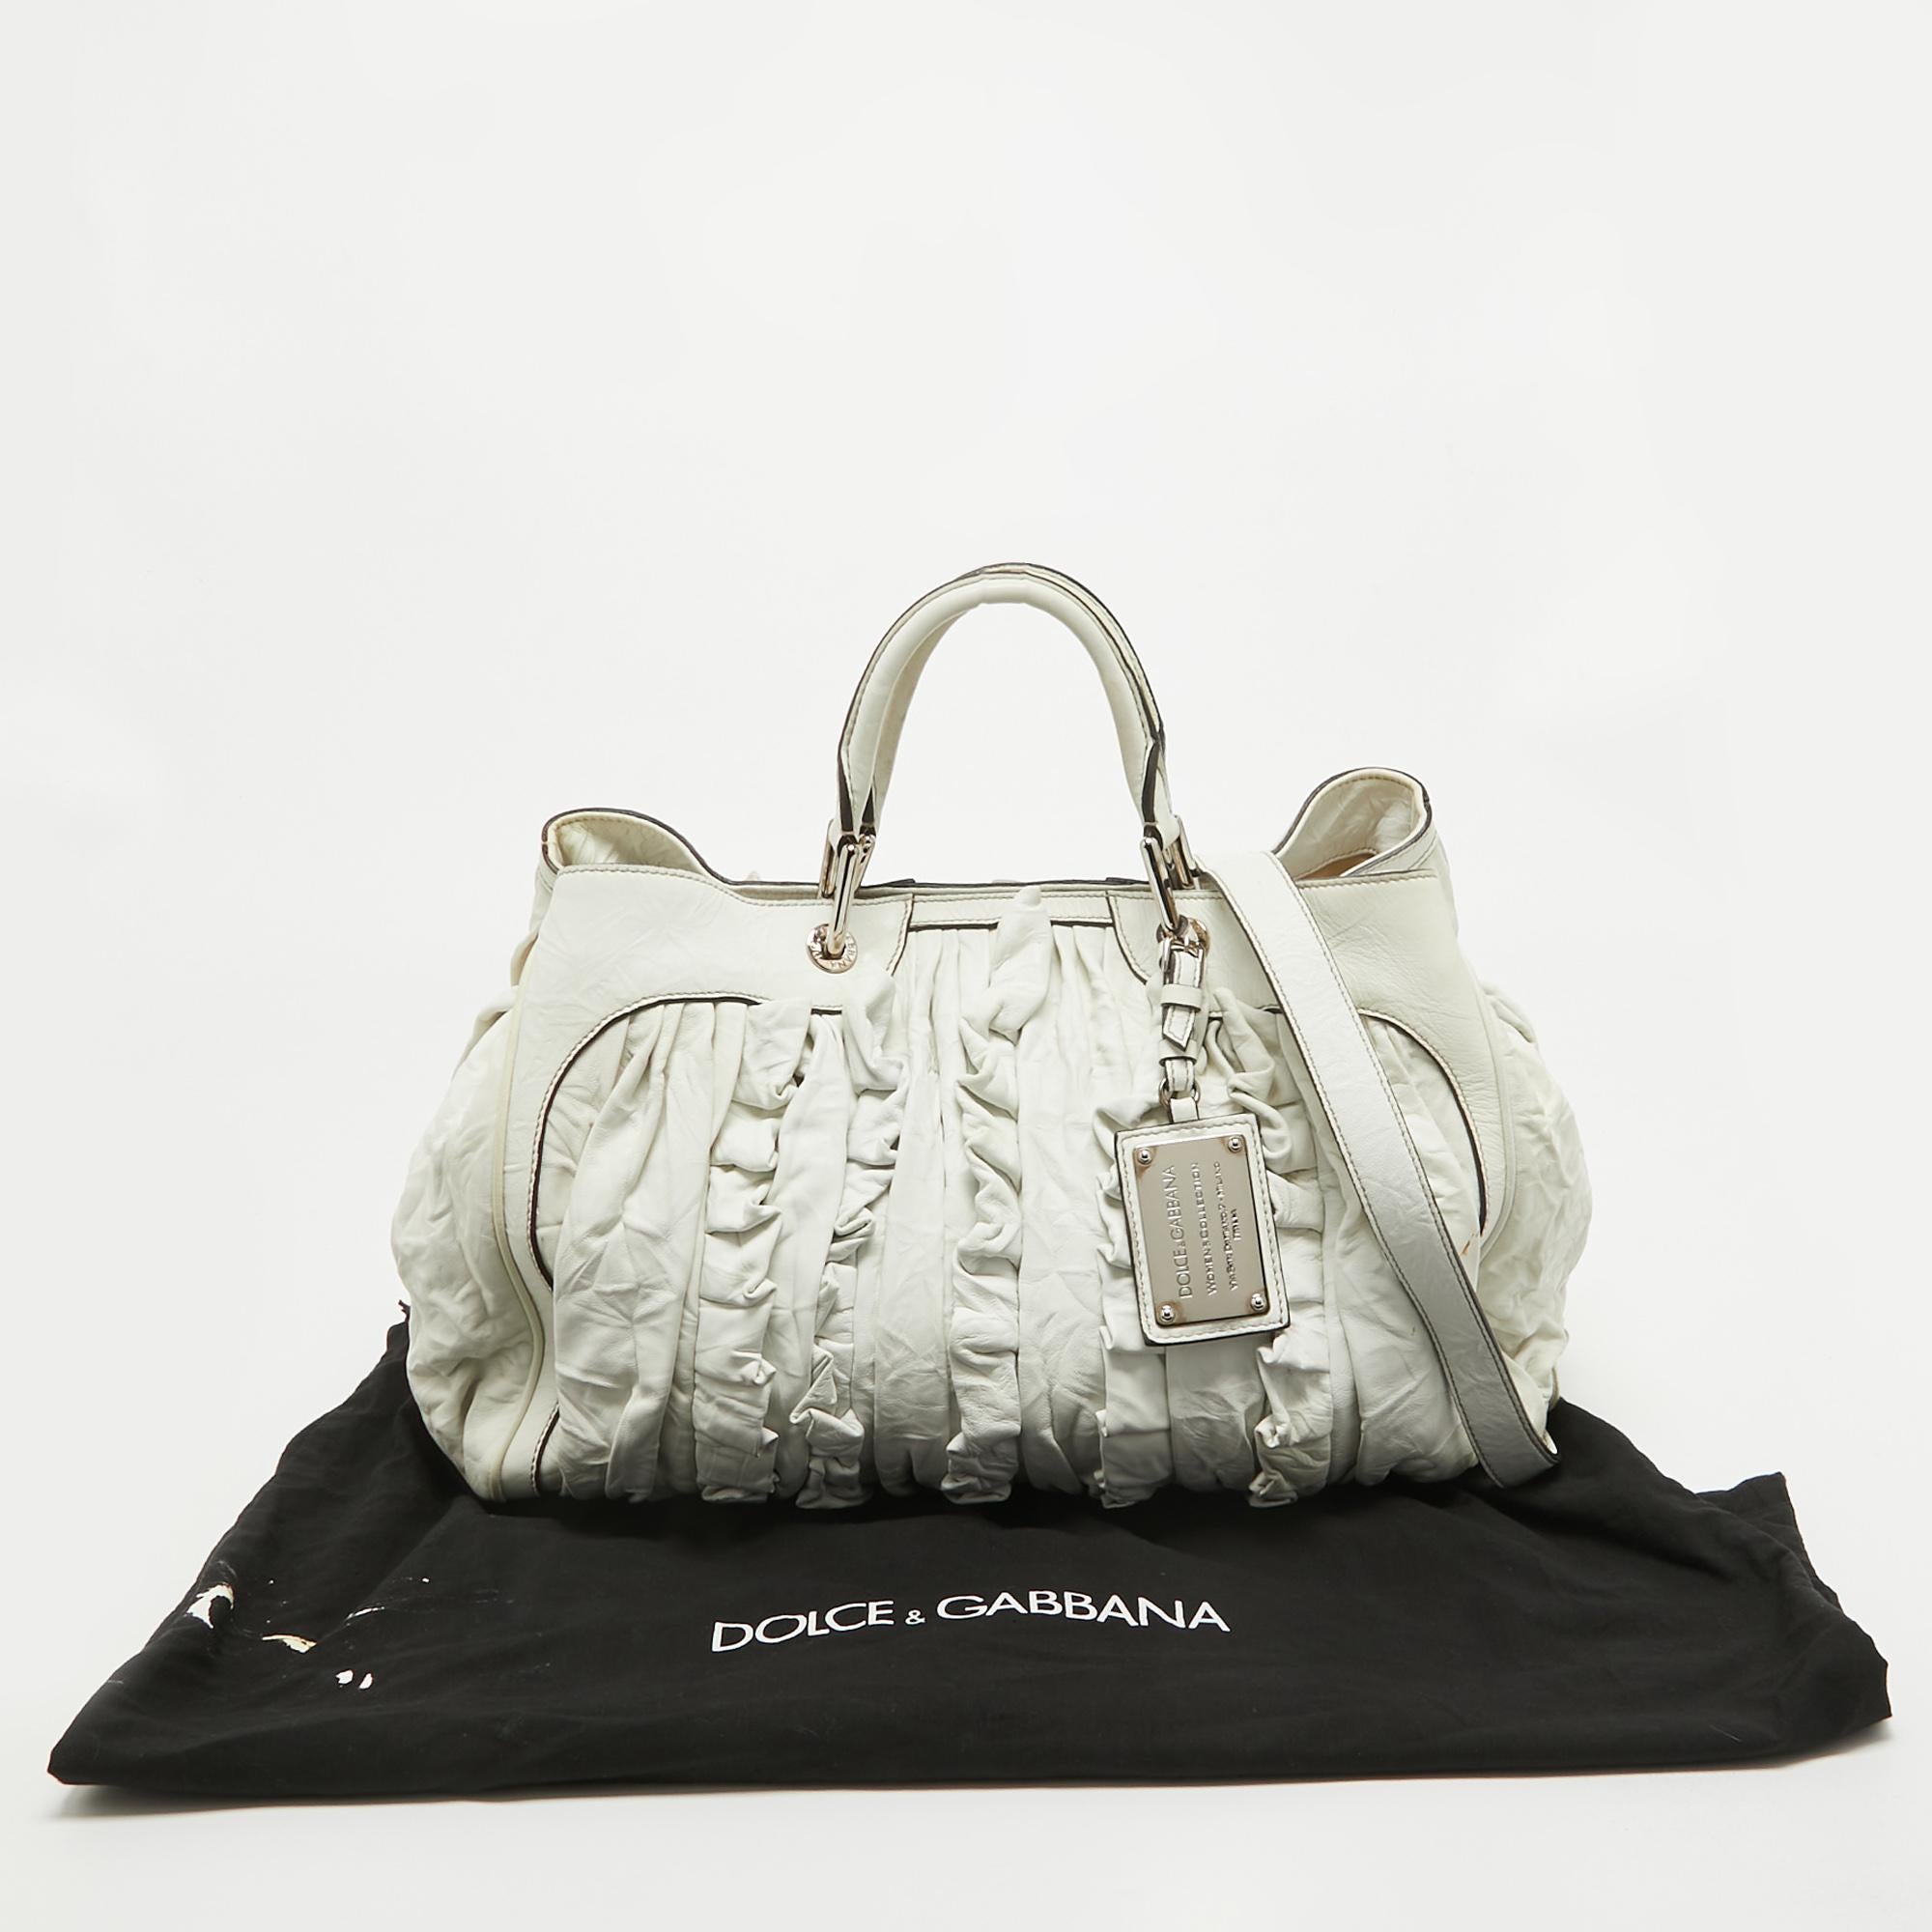 Dolce & Gabbana White Leather Ruffle Miss Brooke Satchel For Sale 16